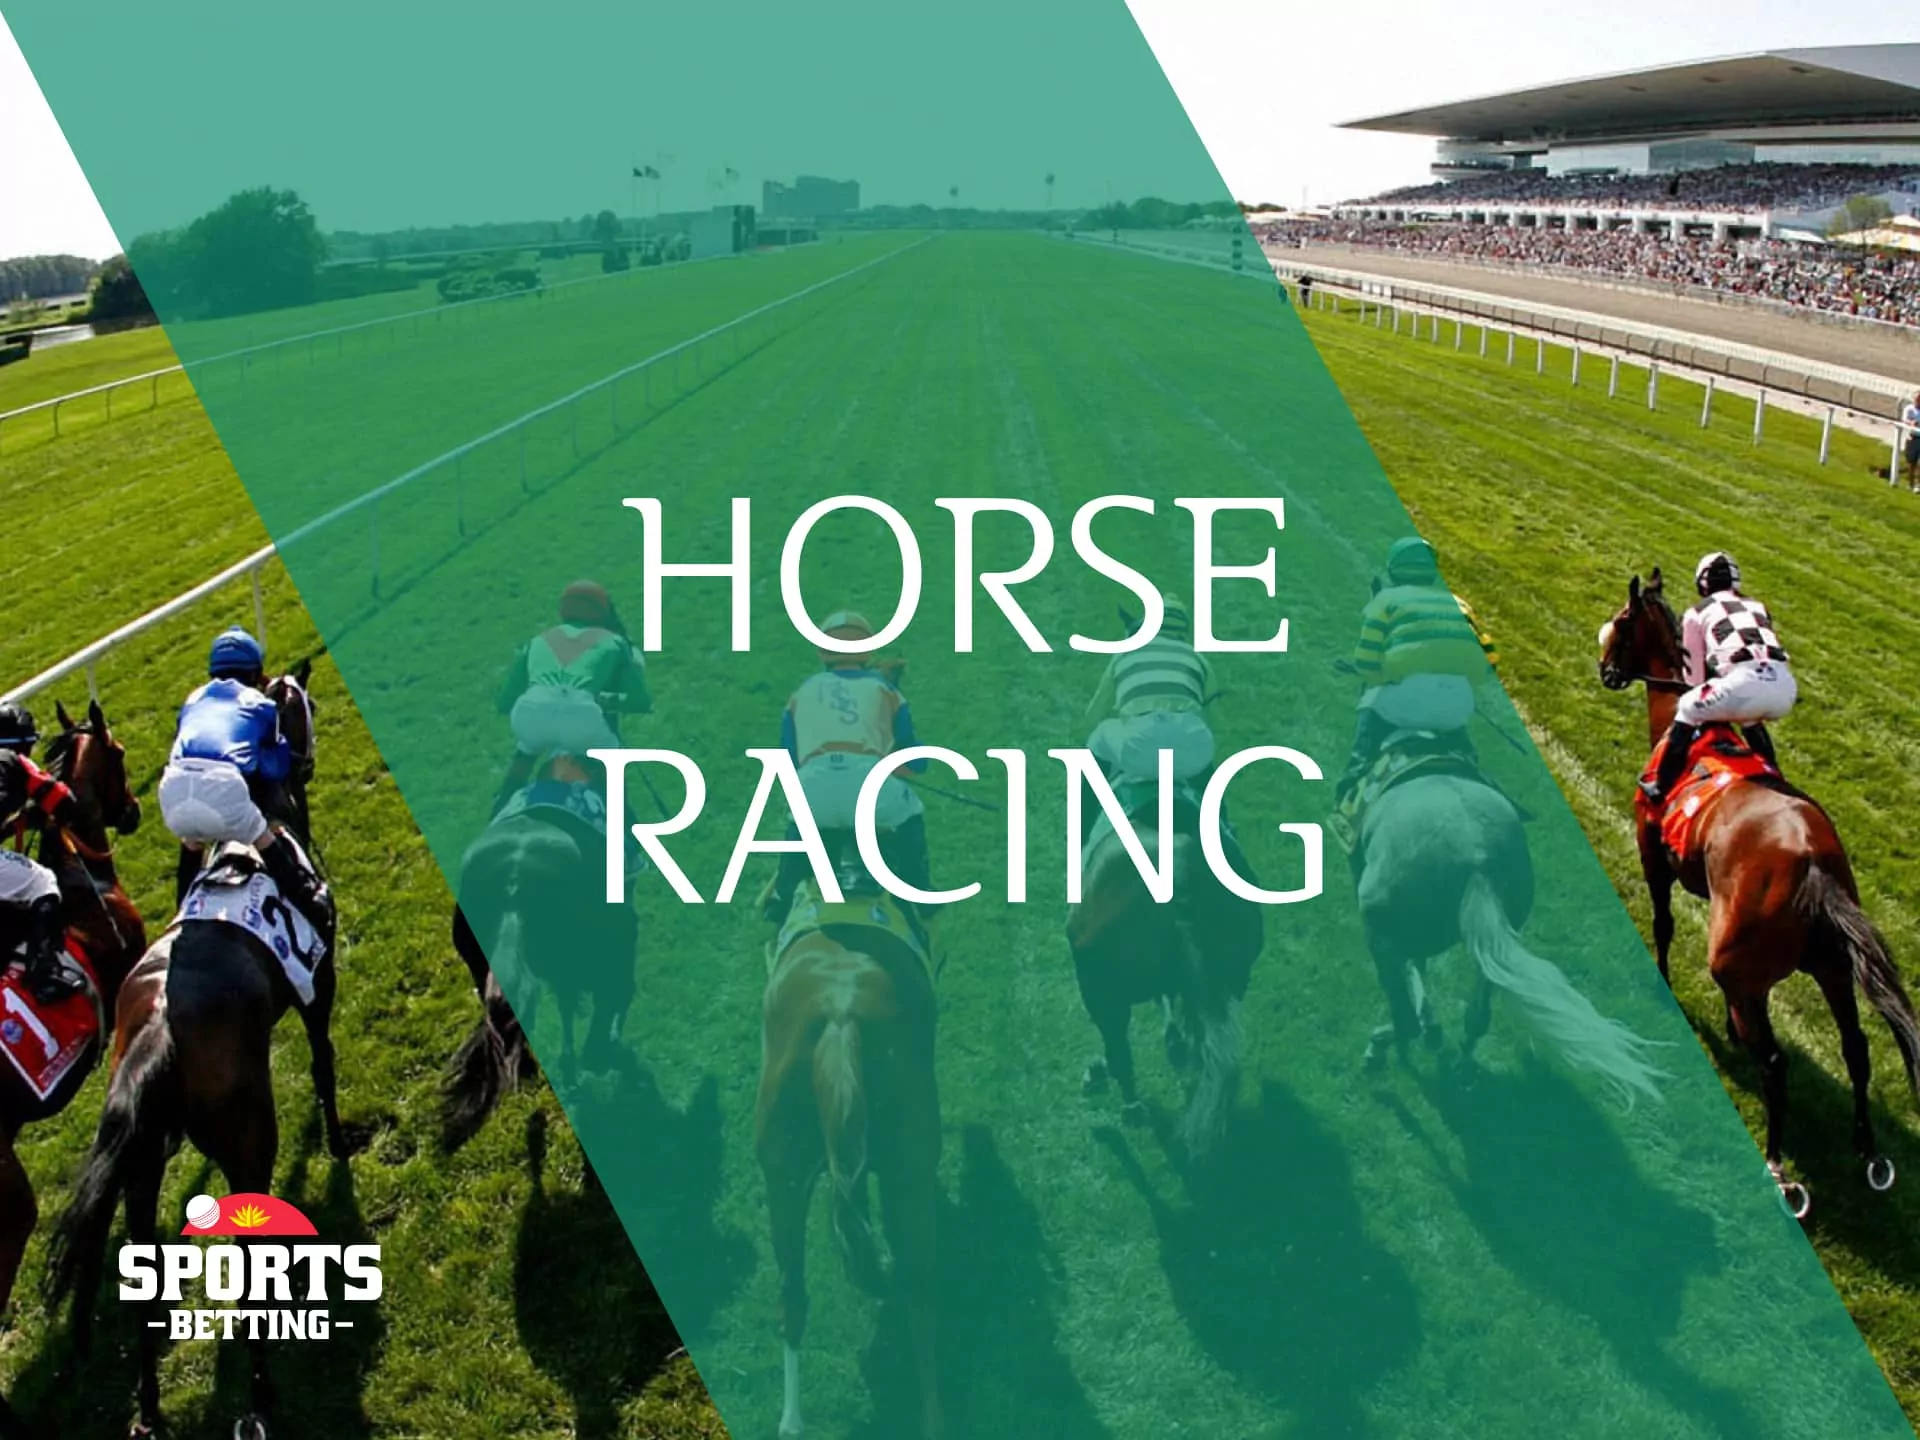 Horse racing is a part of equestrian sport, usually a competition involving three or more horses.